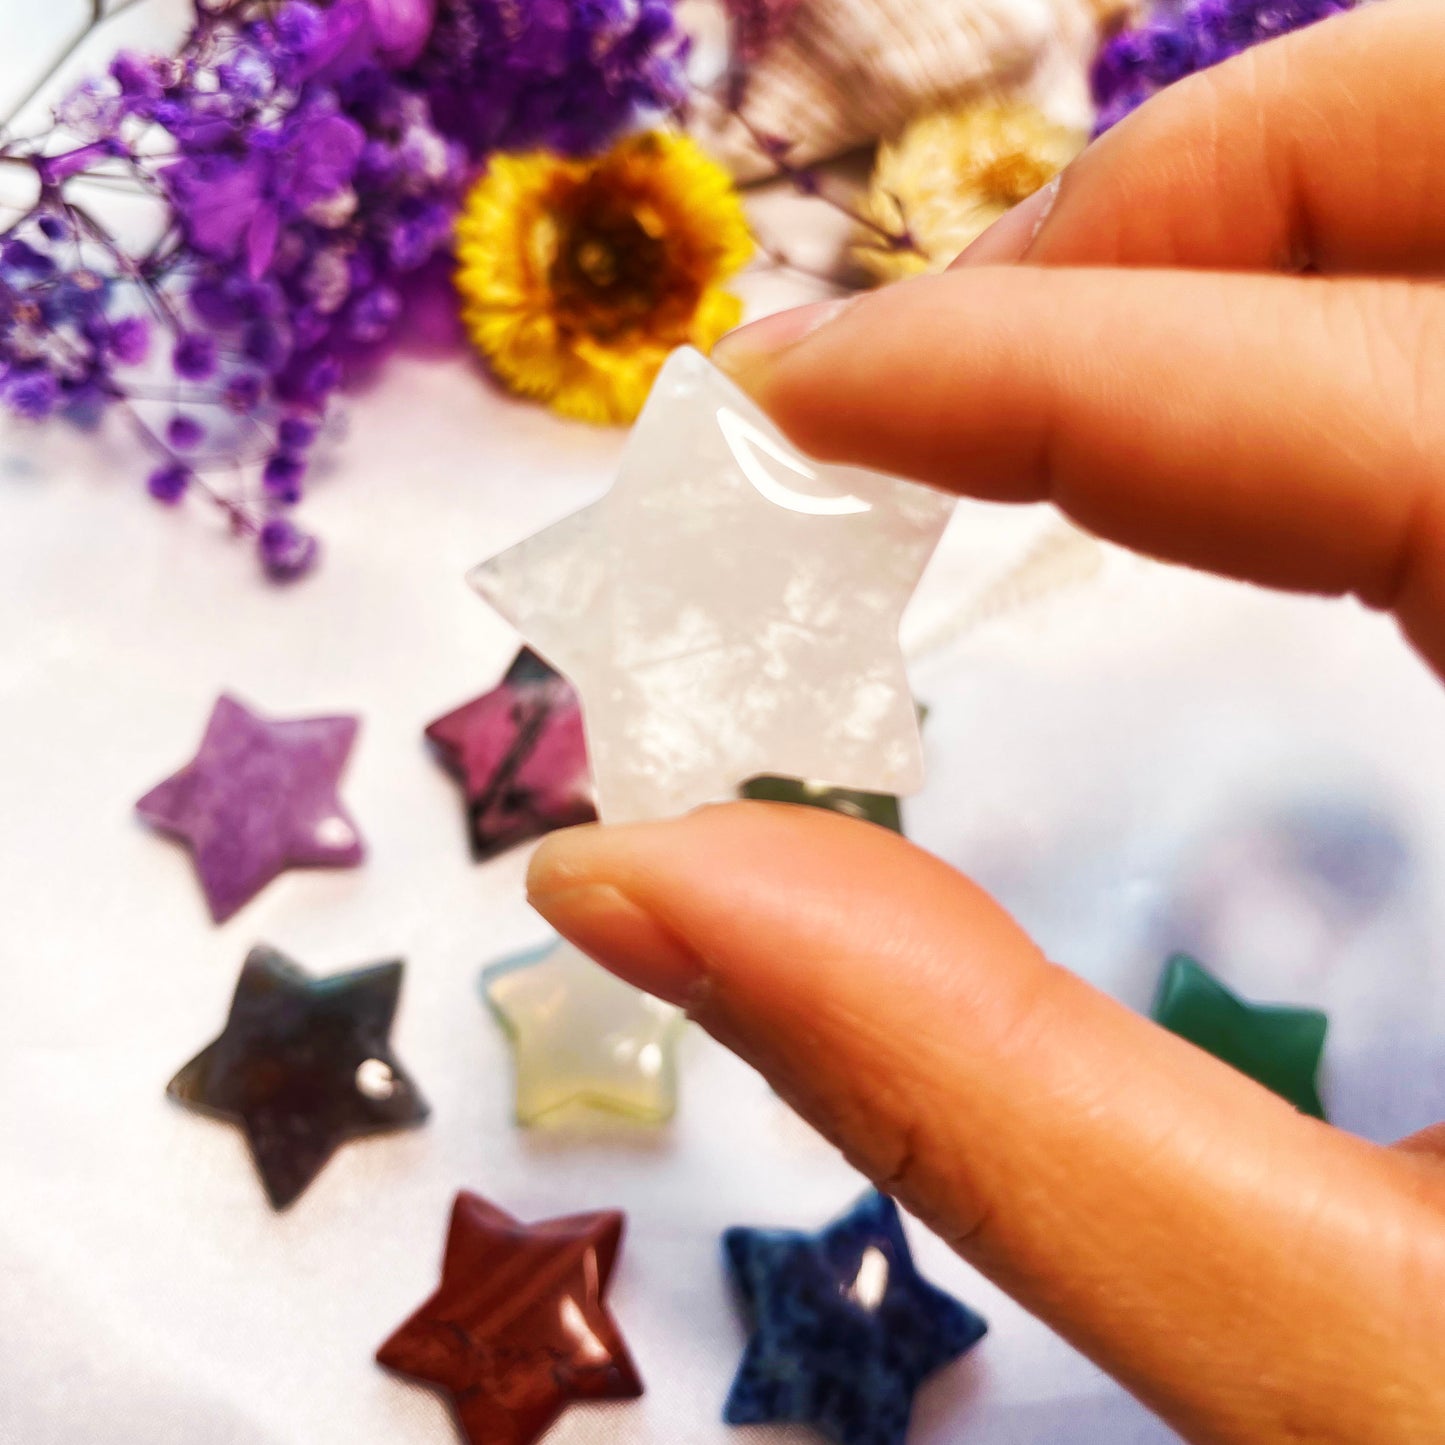 Star crystal carving